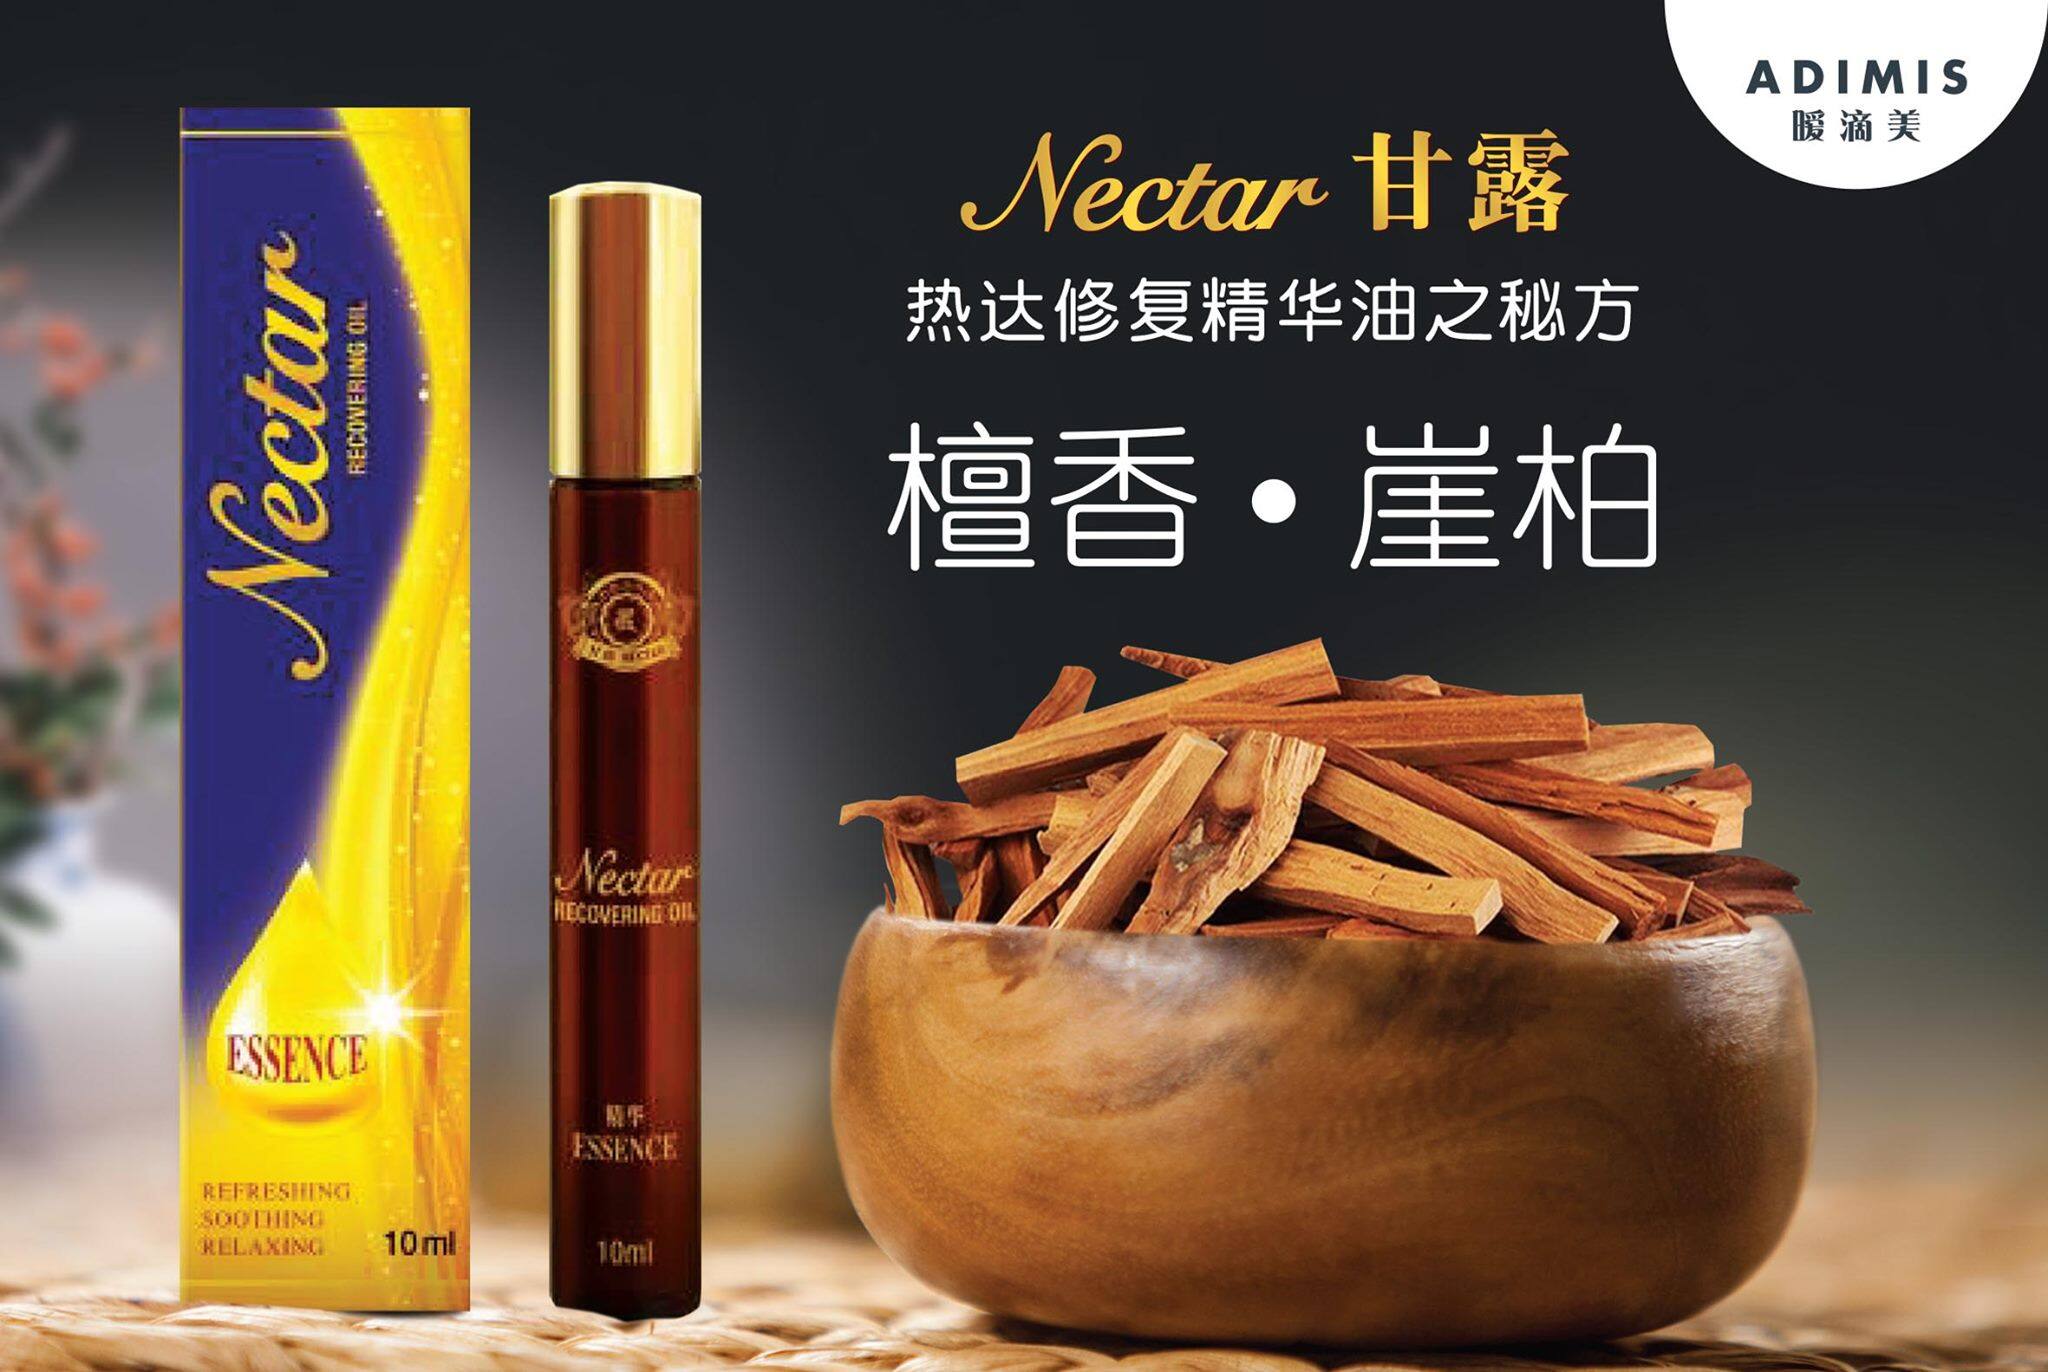 [READY STOCK] - Nectar Recovering Oil - Essence 10ml